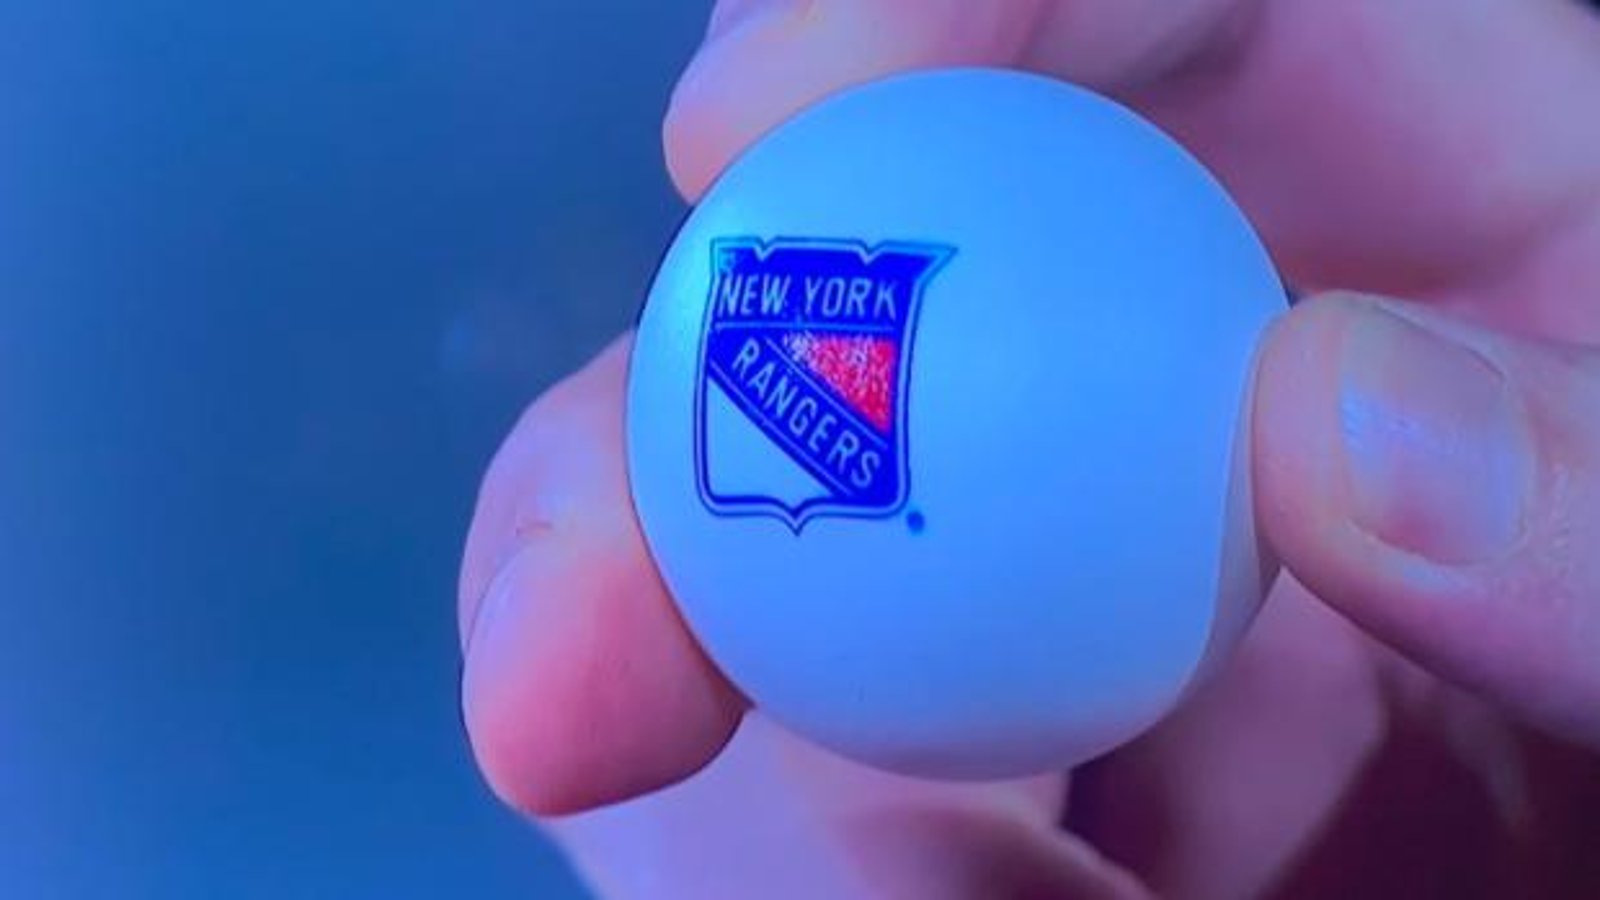 Rangers insider claims the draft lottery was rigged in New York’s favour! 